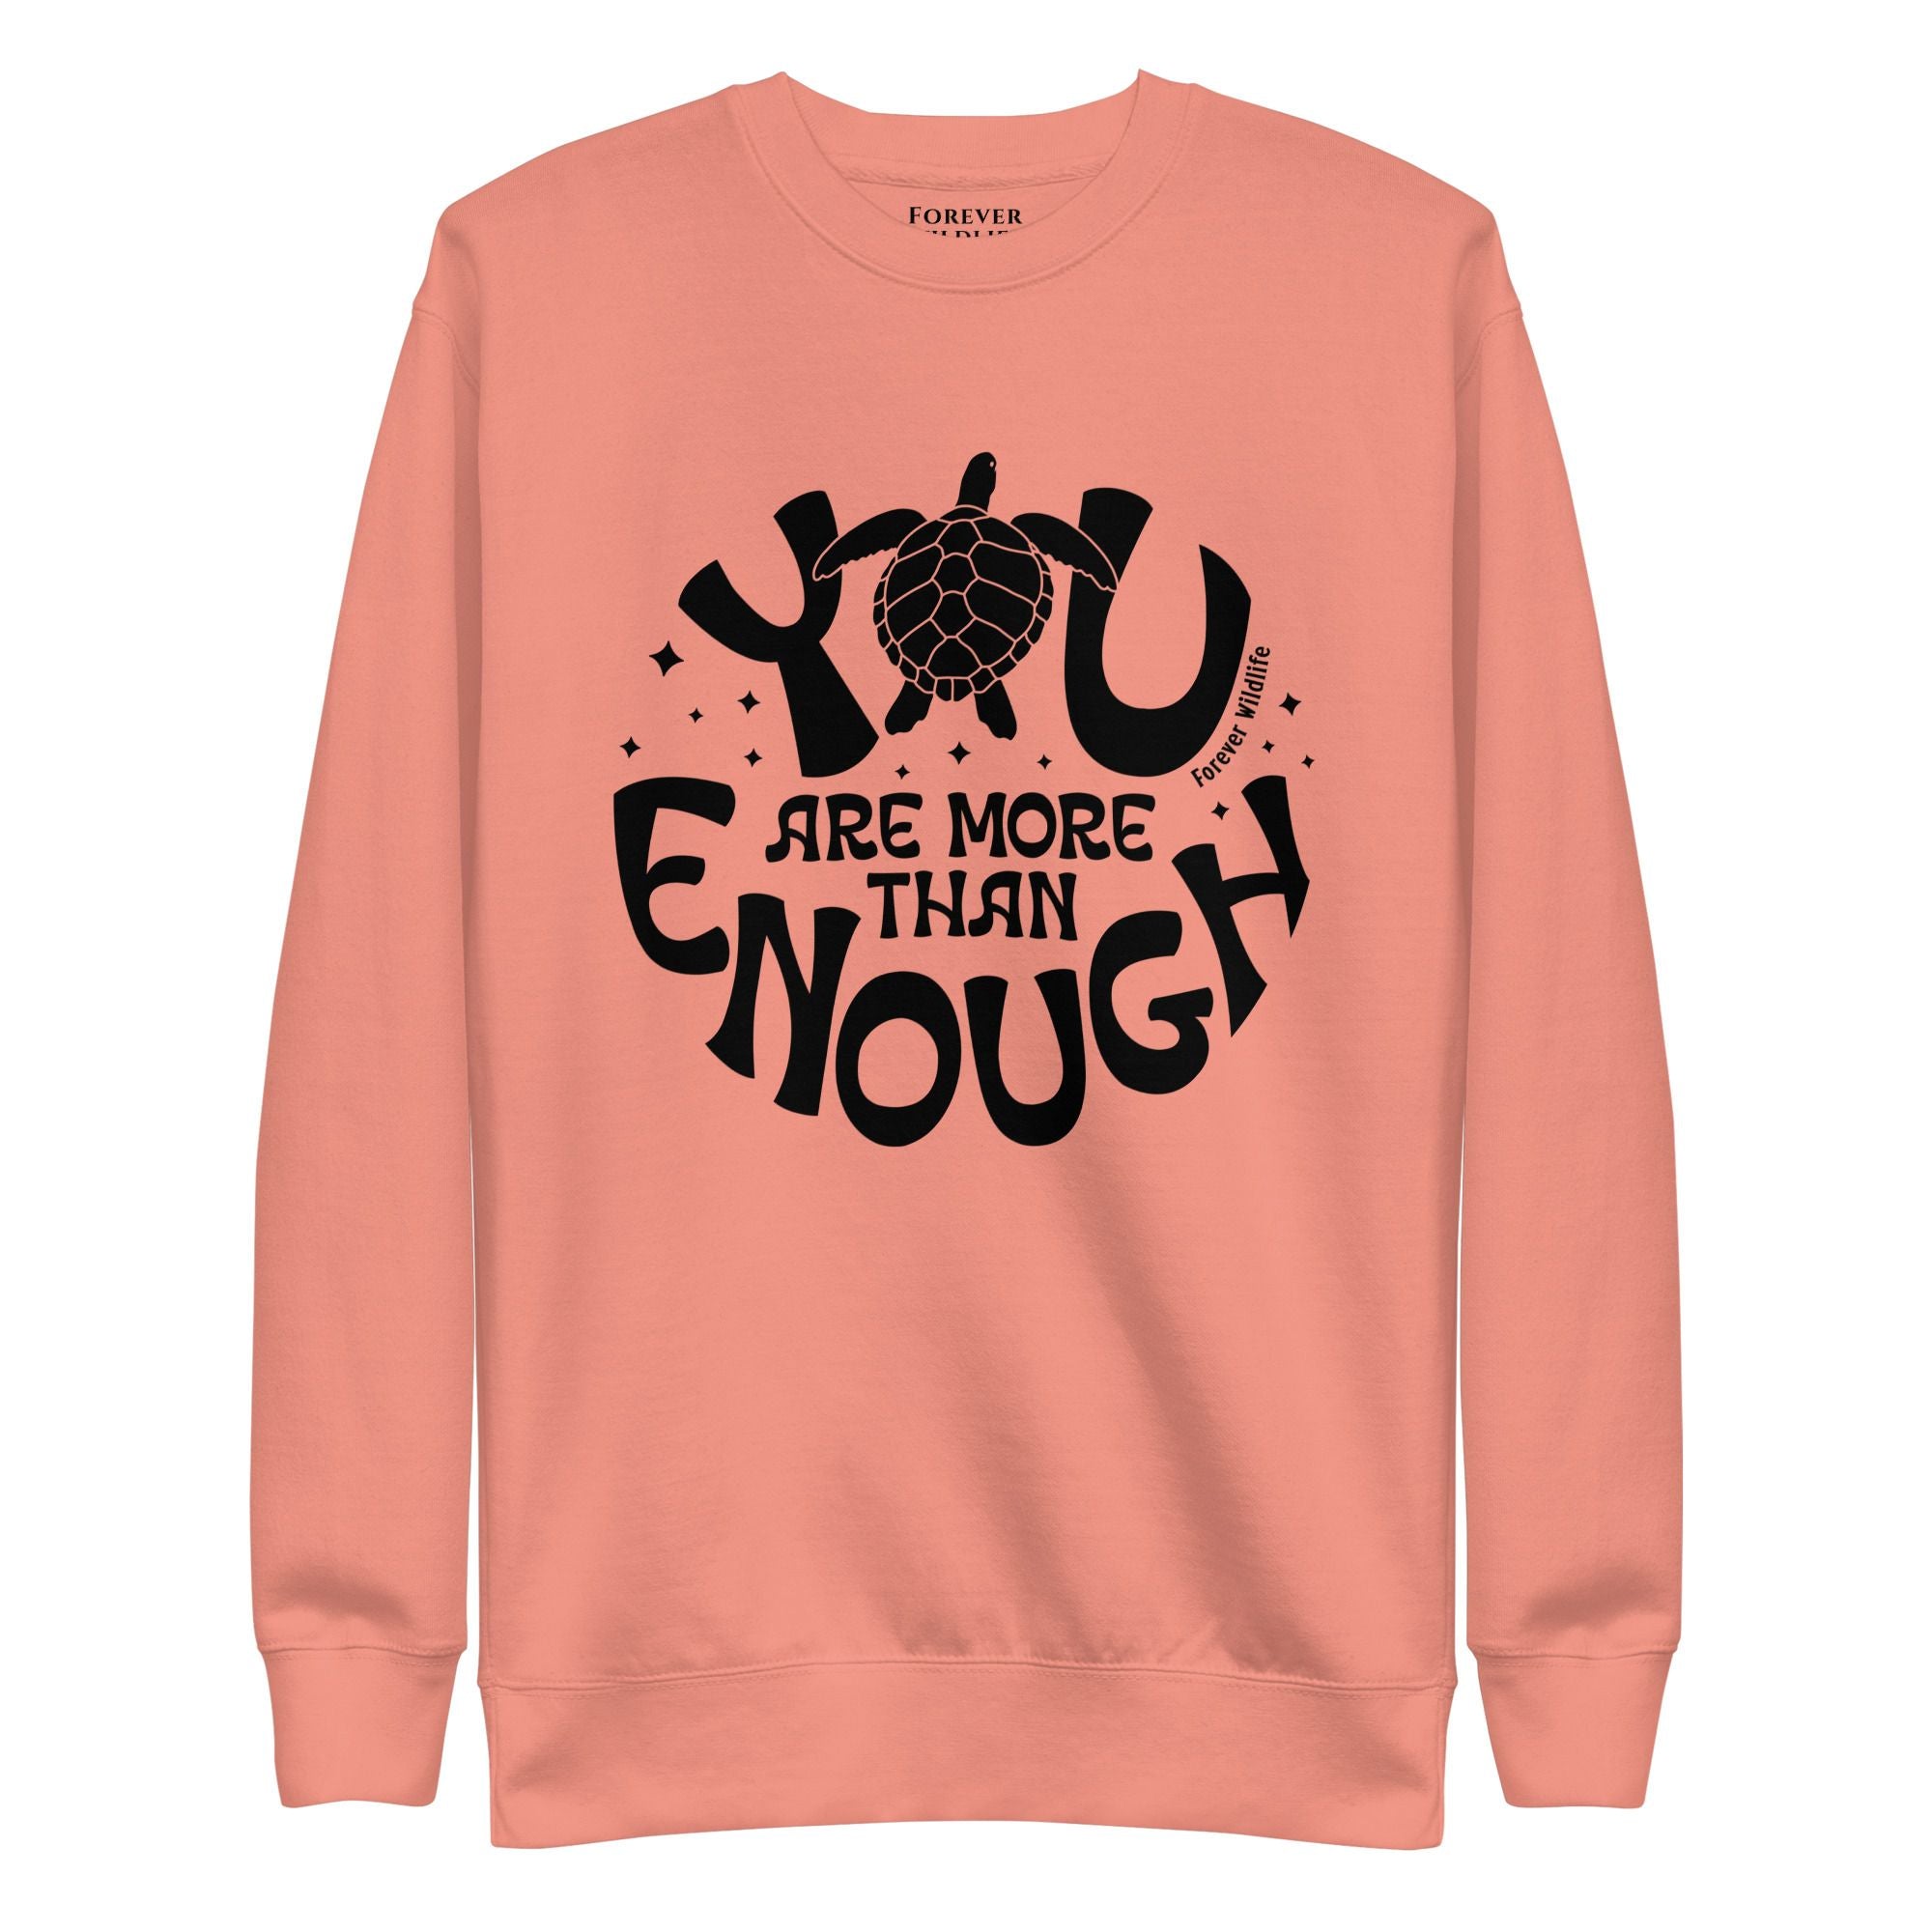 Sea Turtle Sweatshirt in Rose-Premium Wildlife Animal Inspiration Sweatshirt Design with 'You Are More Than Enough' text, part of Wildlife Sweatshirts & Clothing from Forever Wildlife.